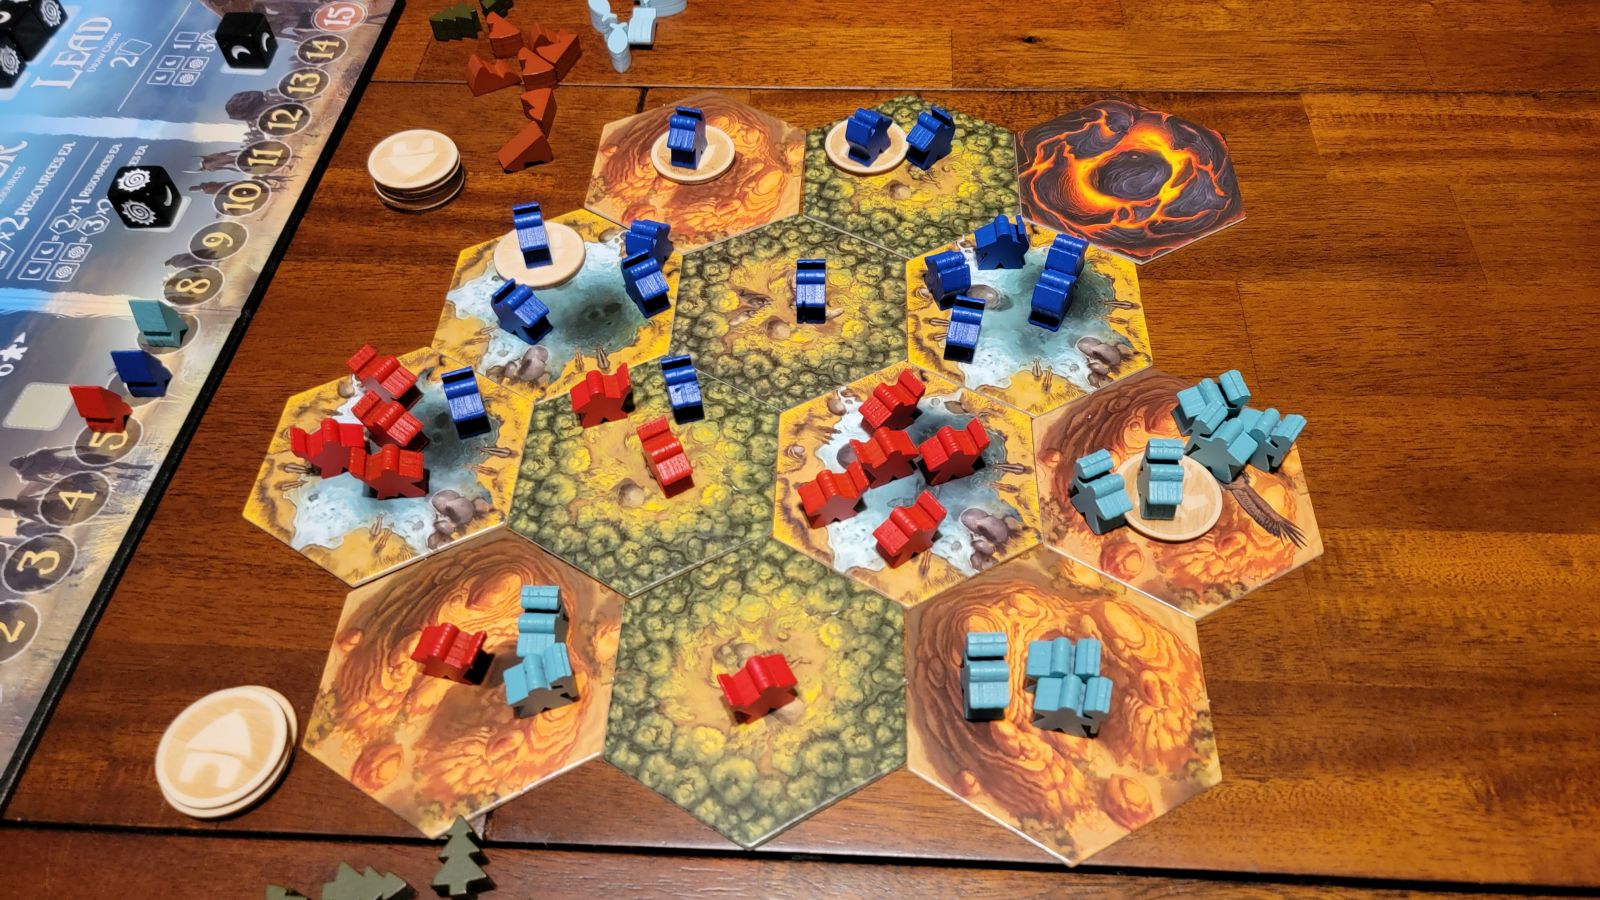 Five Tribes Board Game Review - There Will Be Games